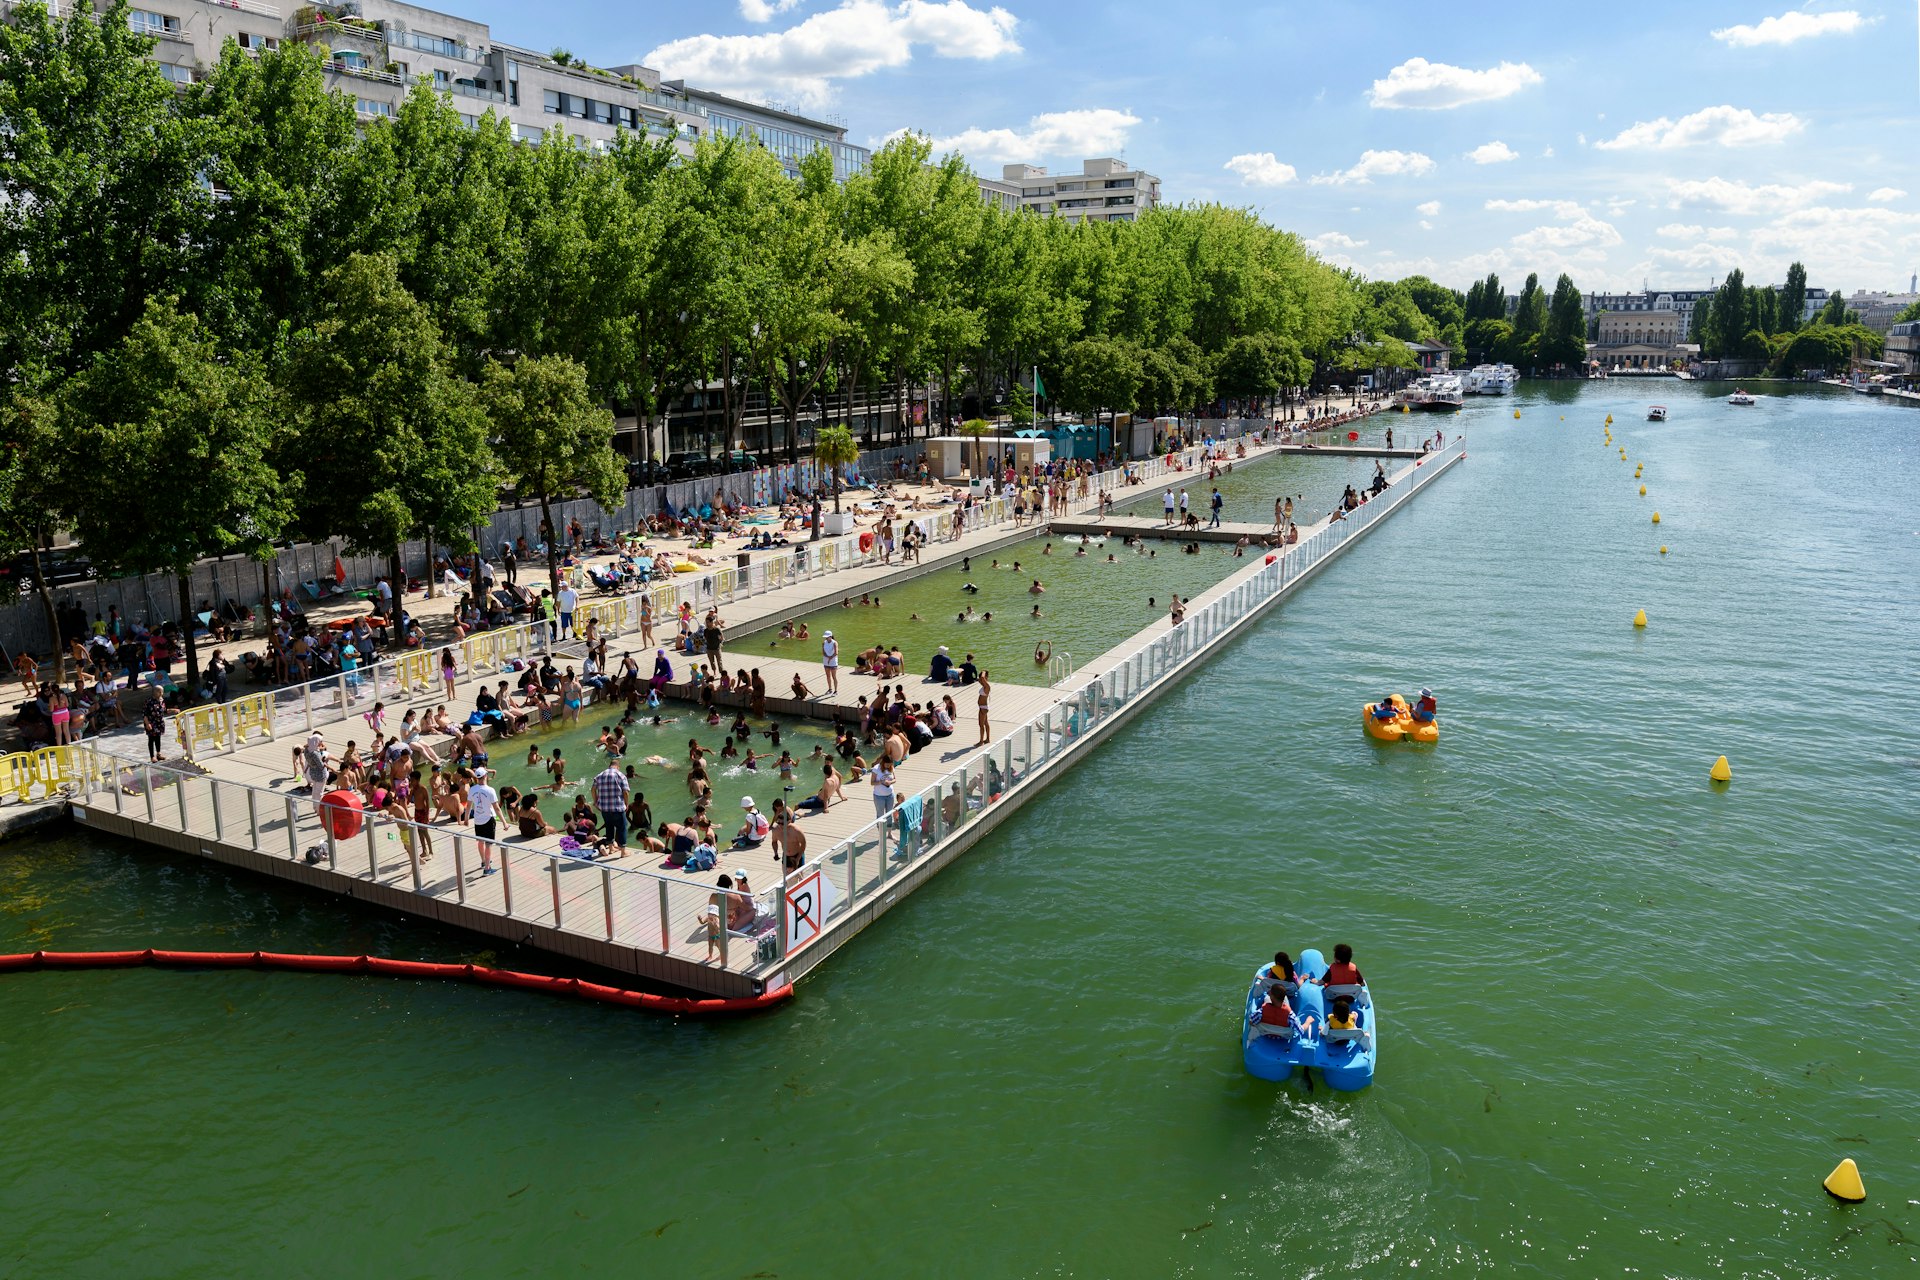 A crowded opening day for the pools on le Bassin de la Villette (Canal de l'Ourcq).